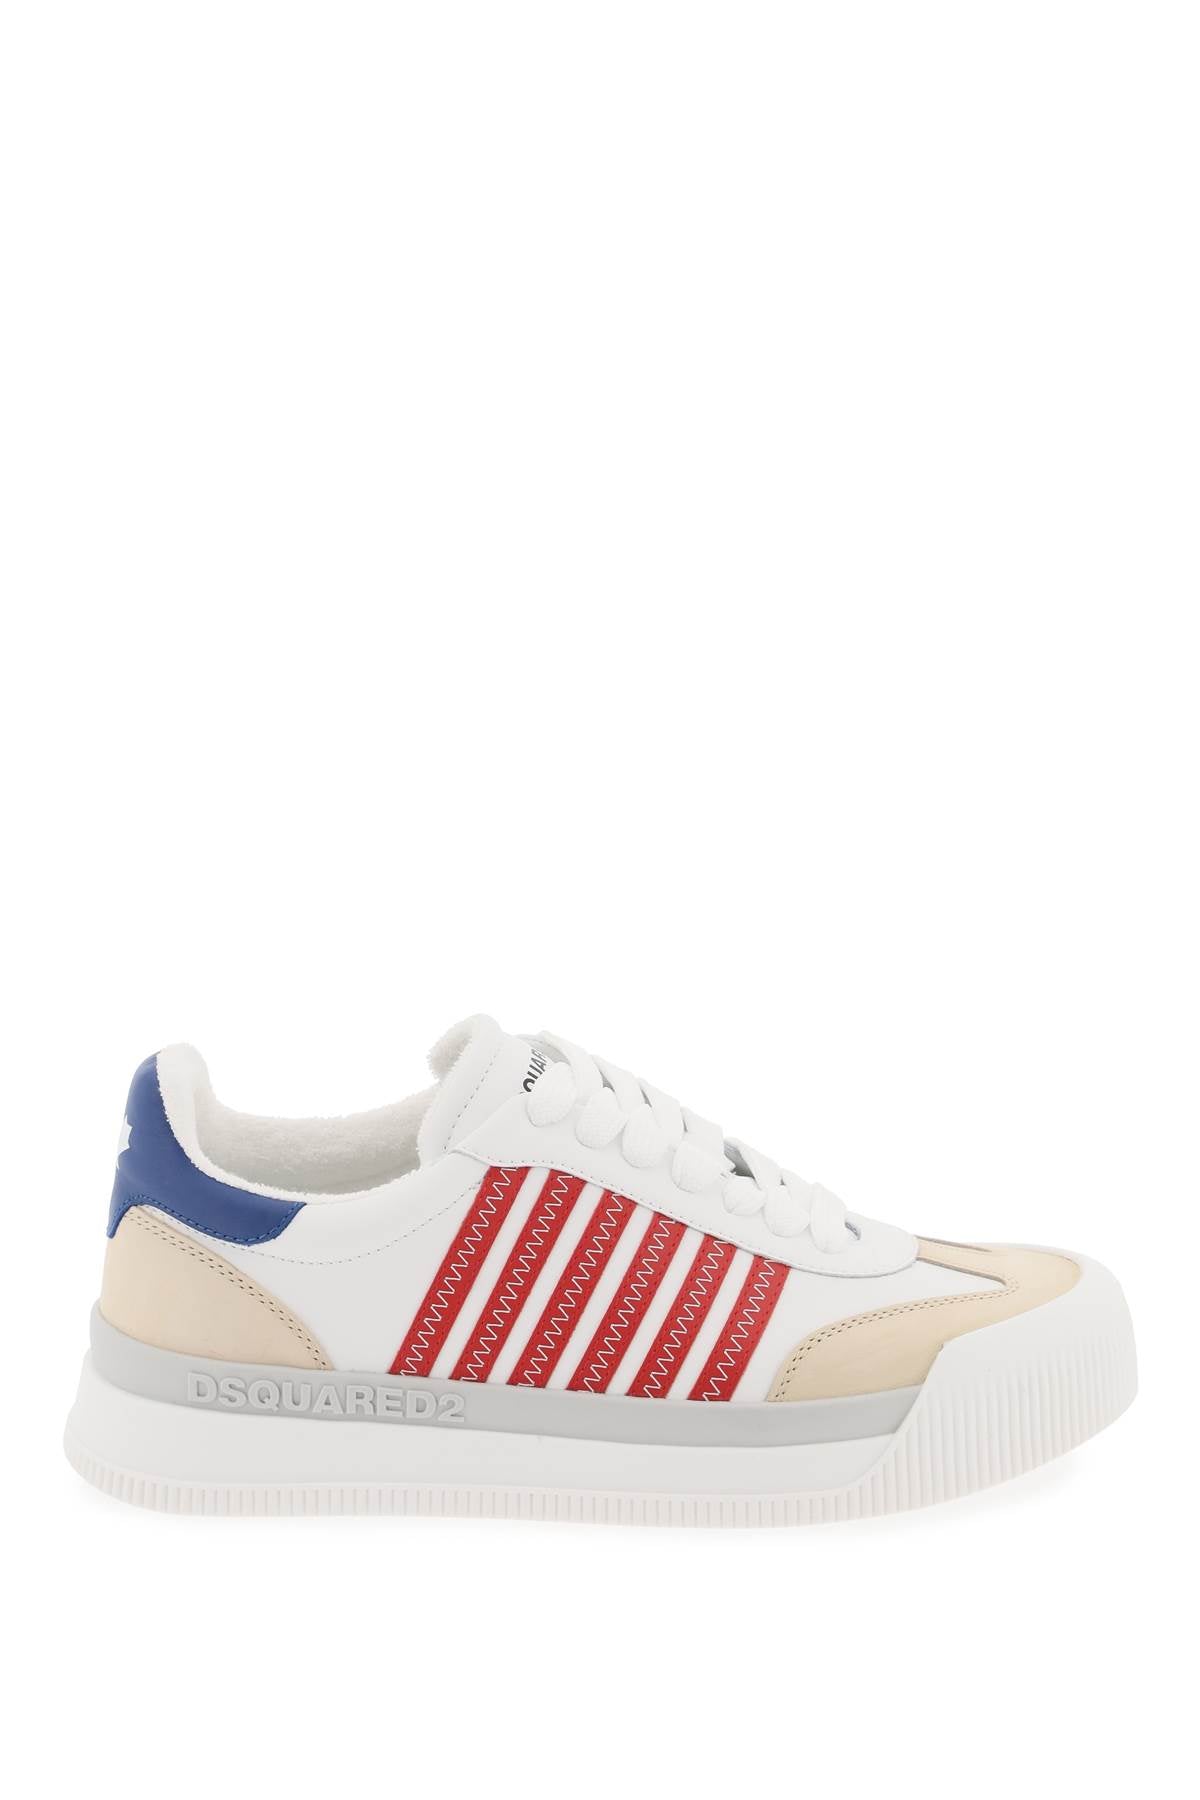 Dsquared2 new jersey sneakers-0